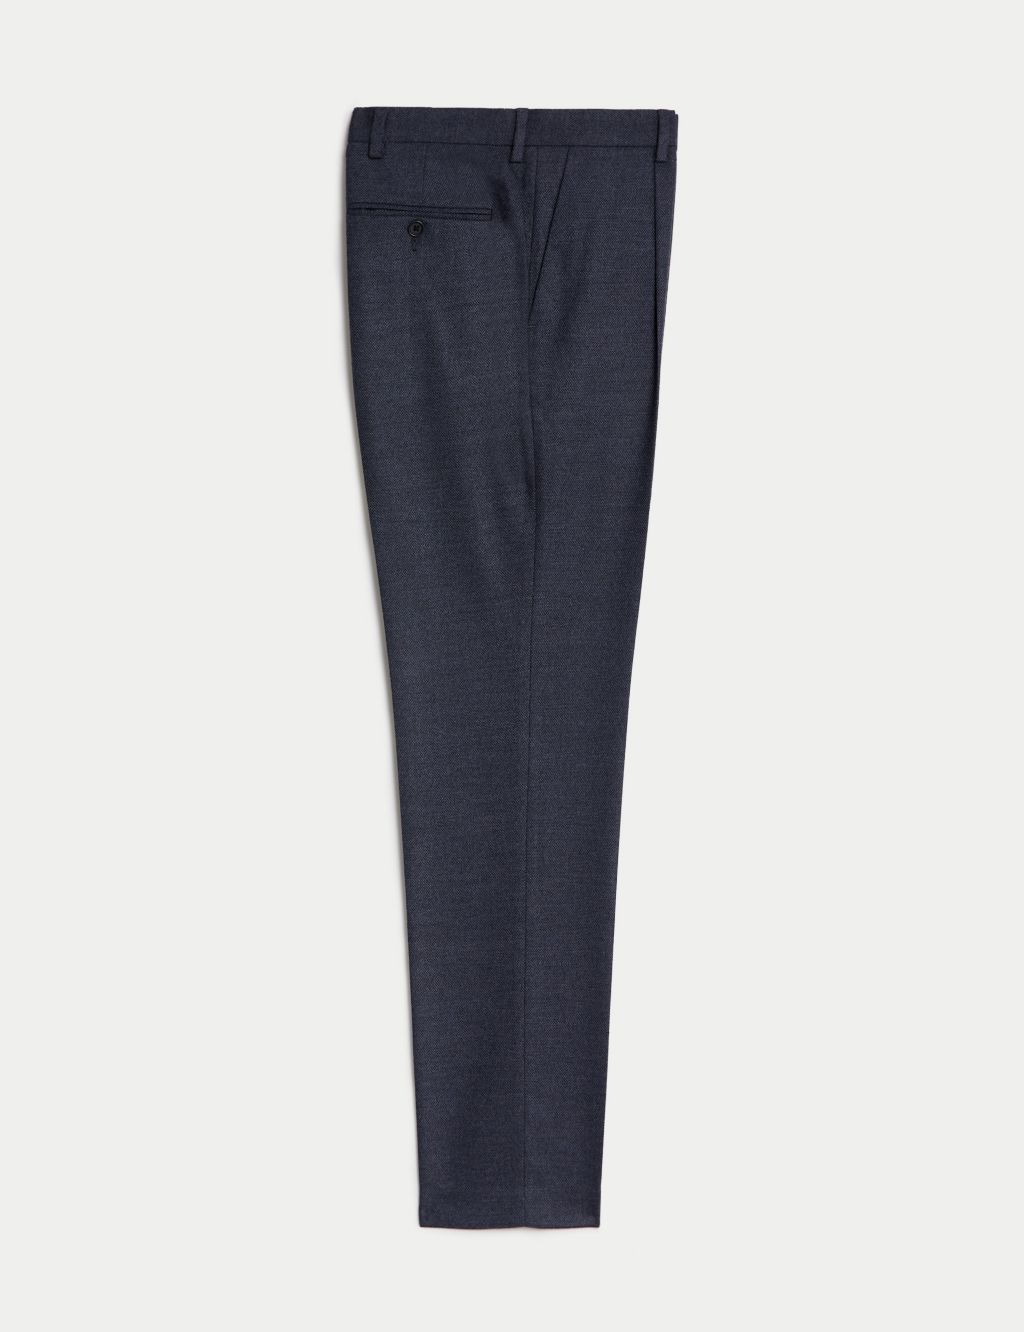 Textured Stretch Trousers image 2